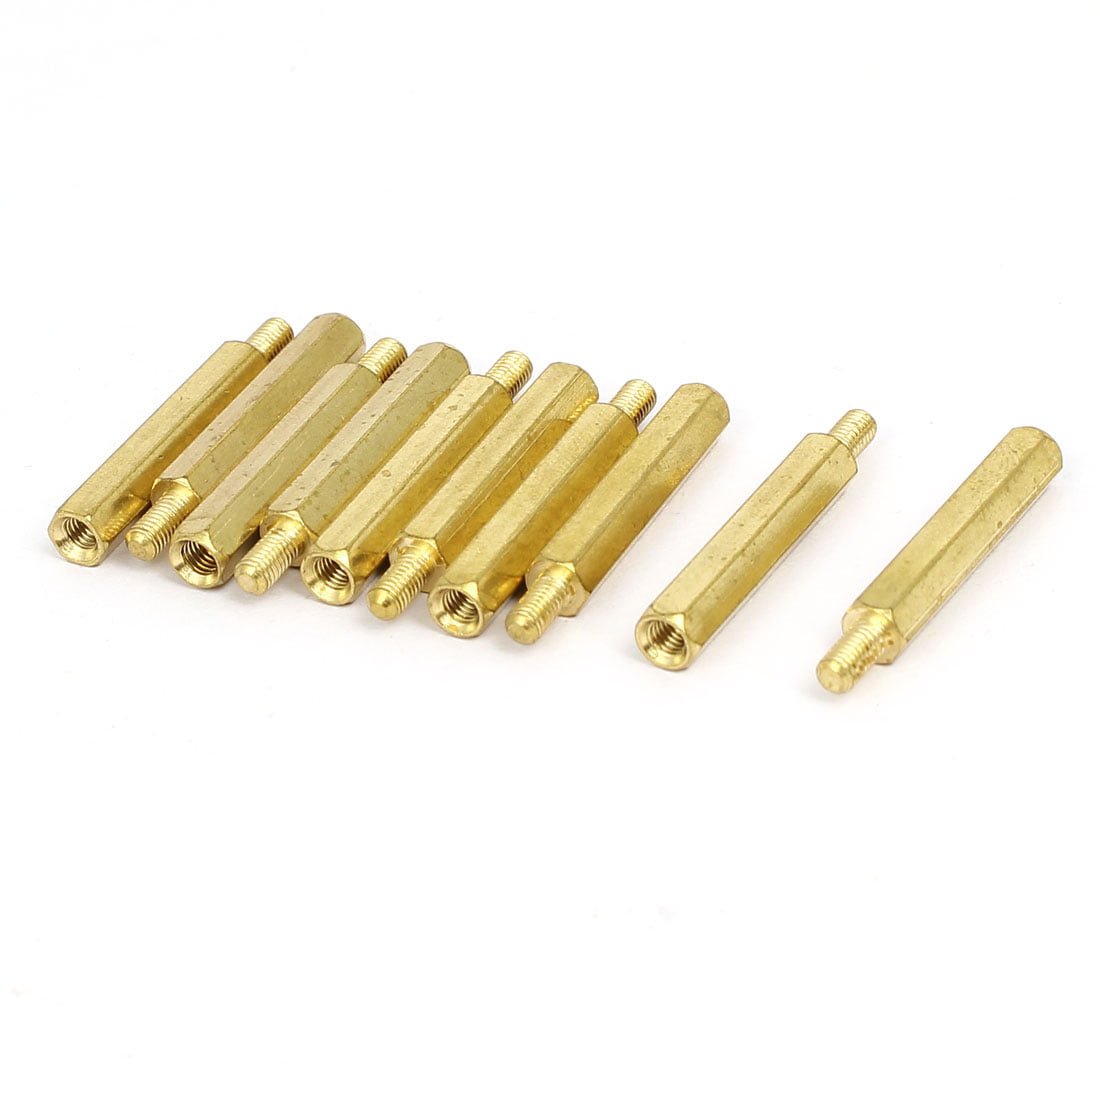 Details about   Spacer Bolts Sleeves Brass Hex Female-Female Thread Standoff  M2 M2.5 M3 M4 